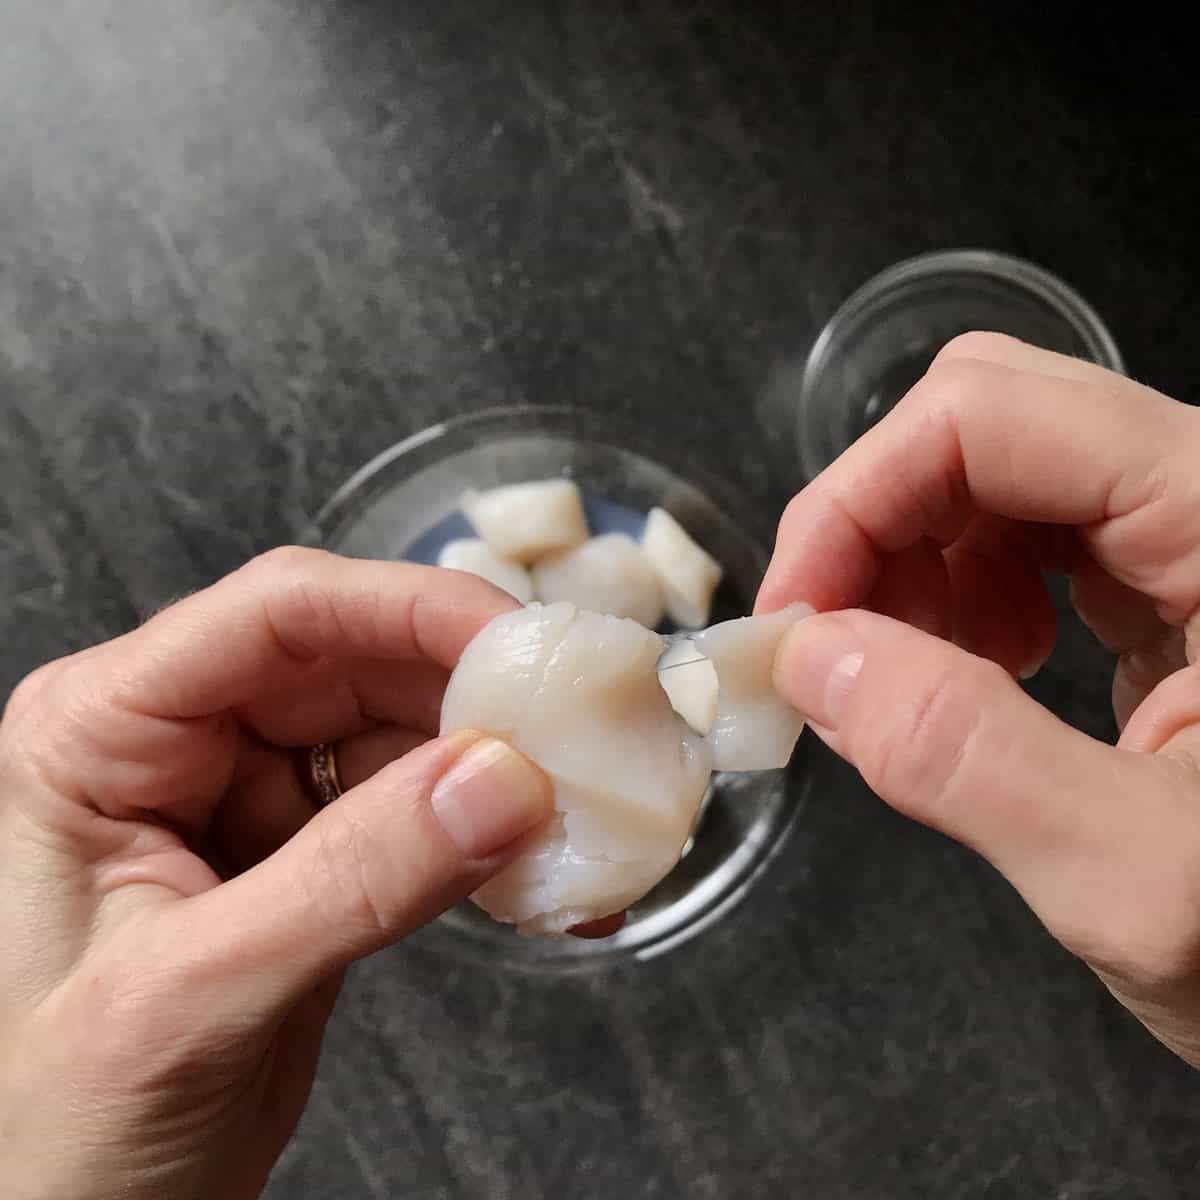 The side muscle of a scallop in the process of being peeled away.